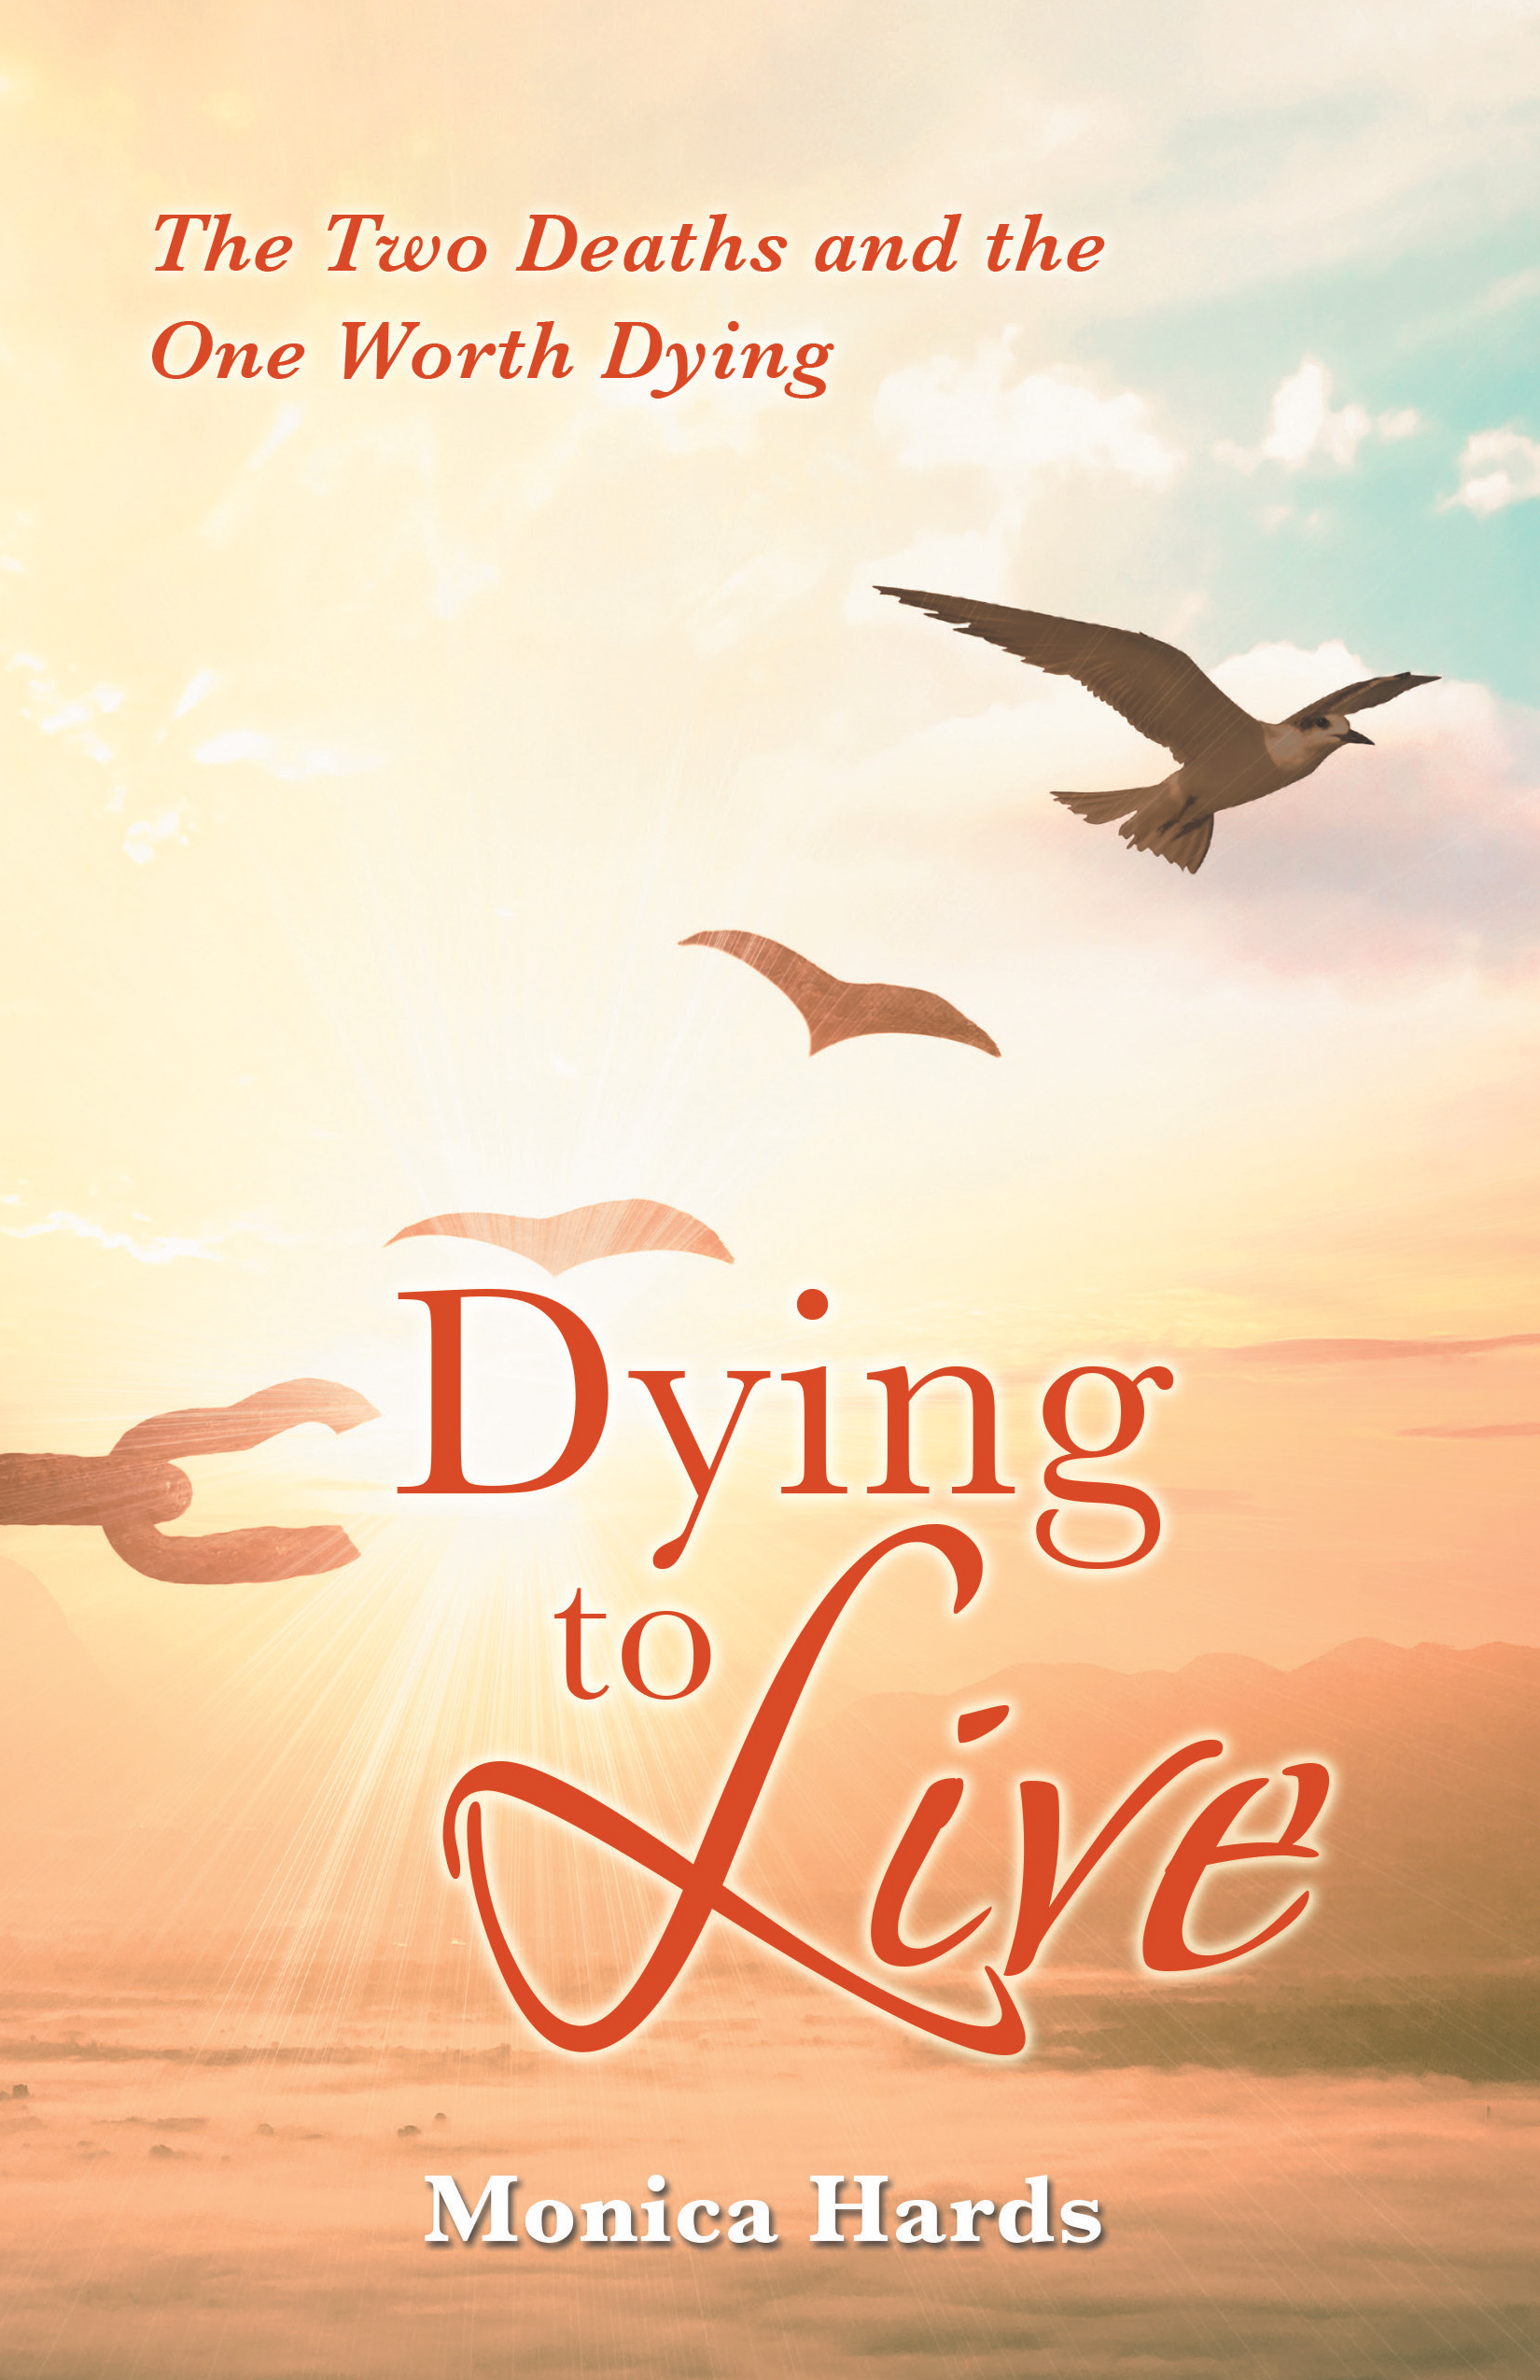 “Dying to Live: The Two Deaths and the One Worth Dying”
By Monica Hards